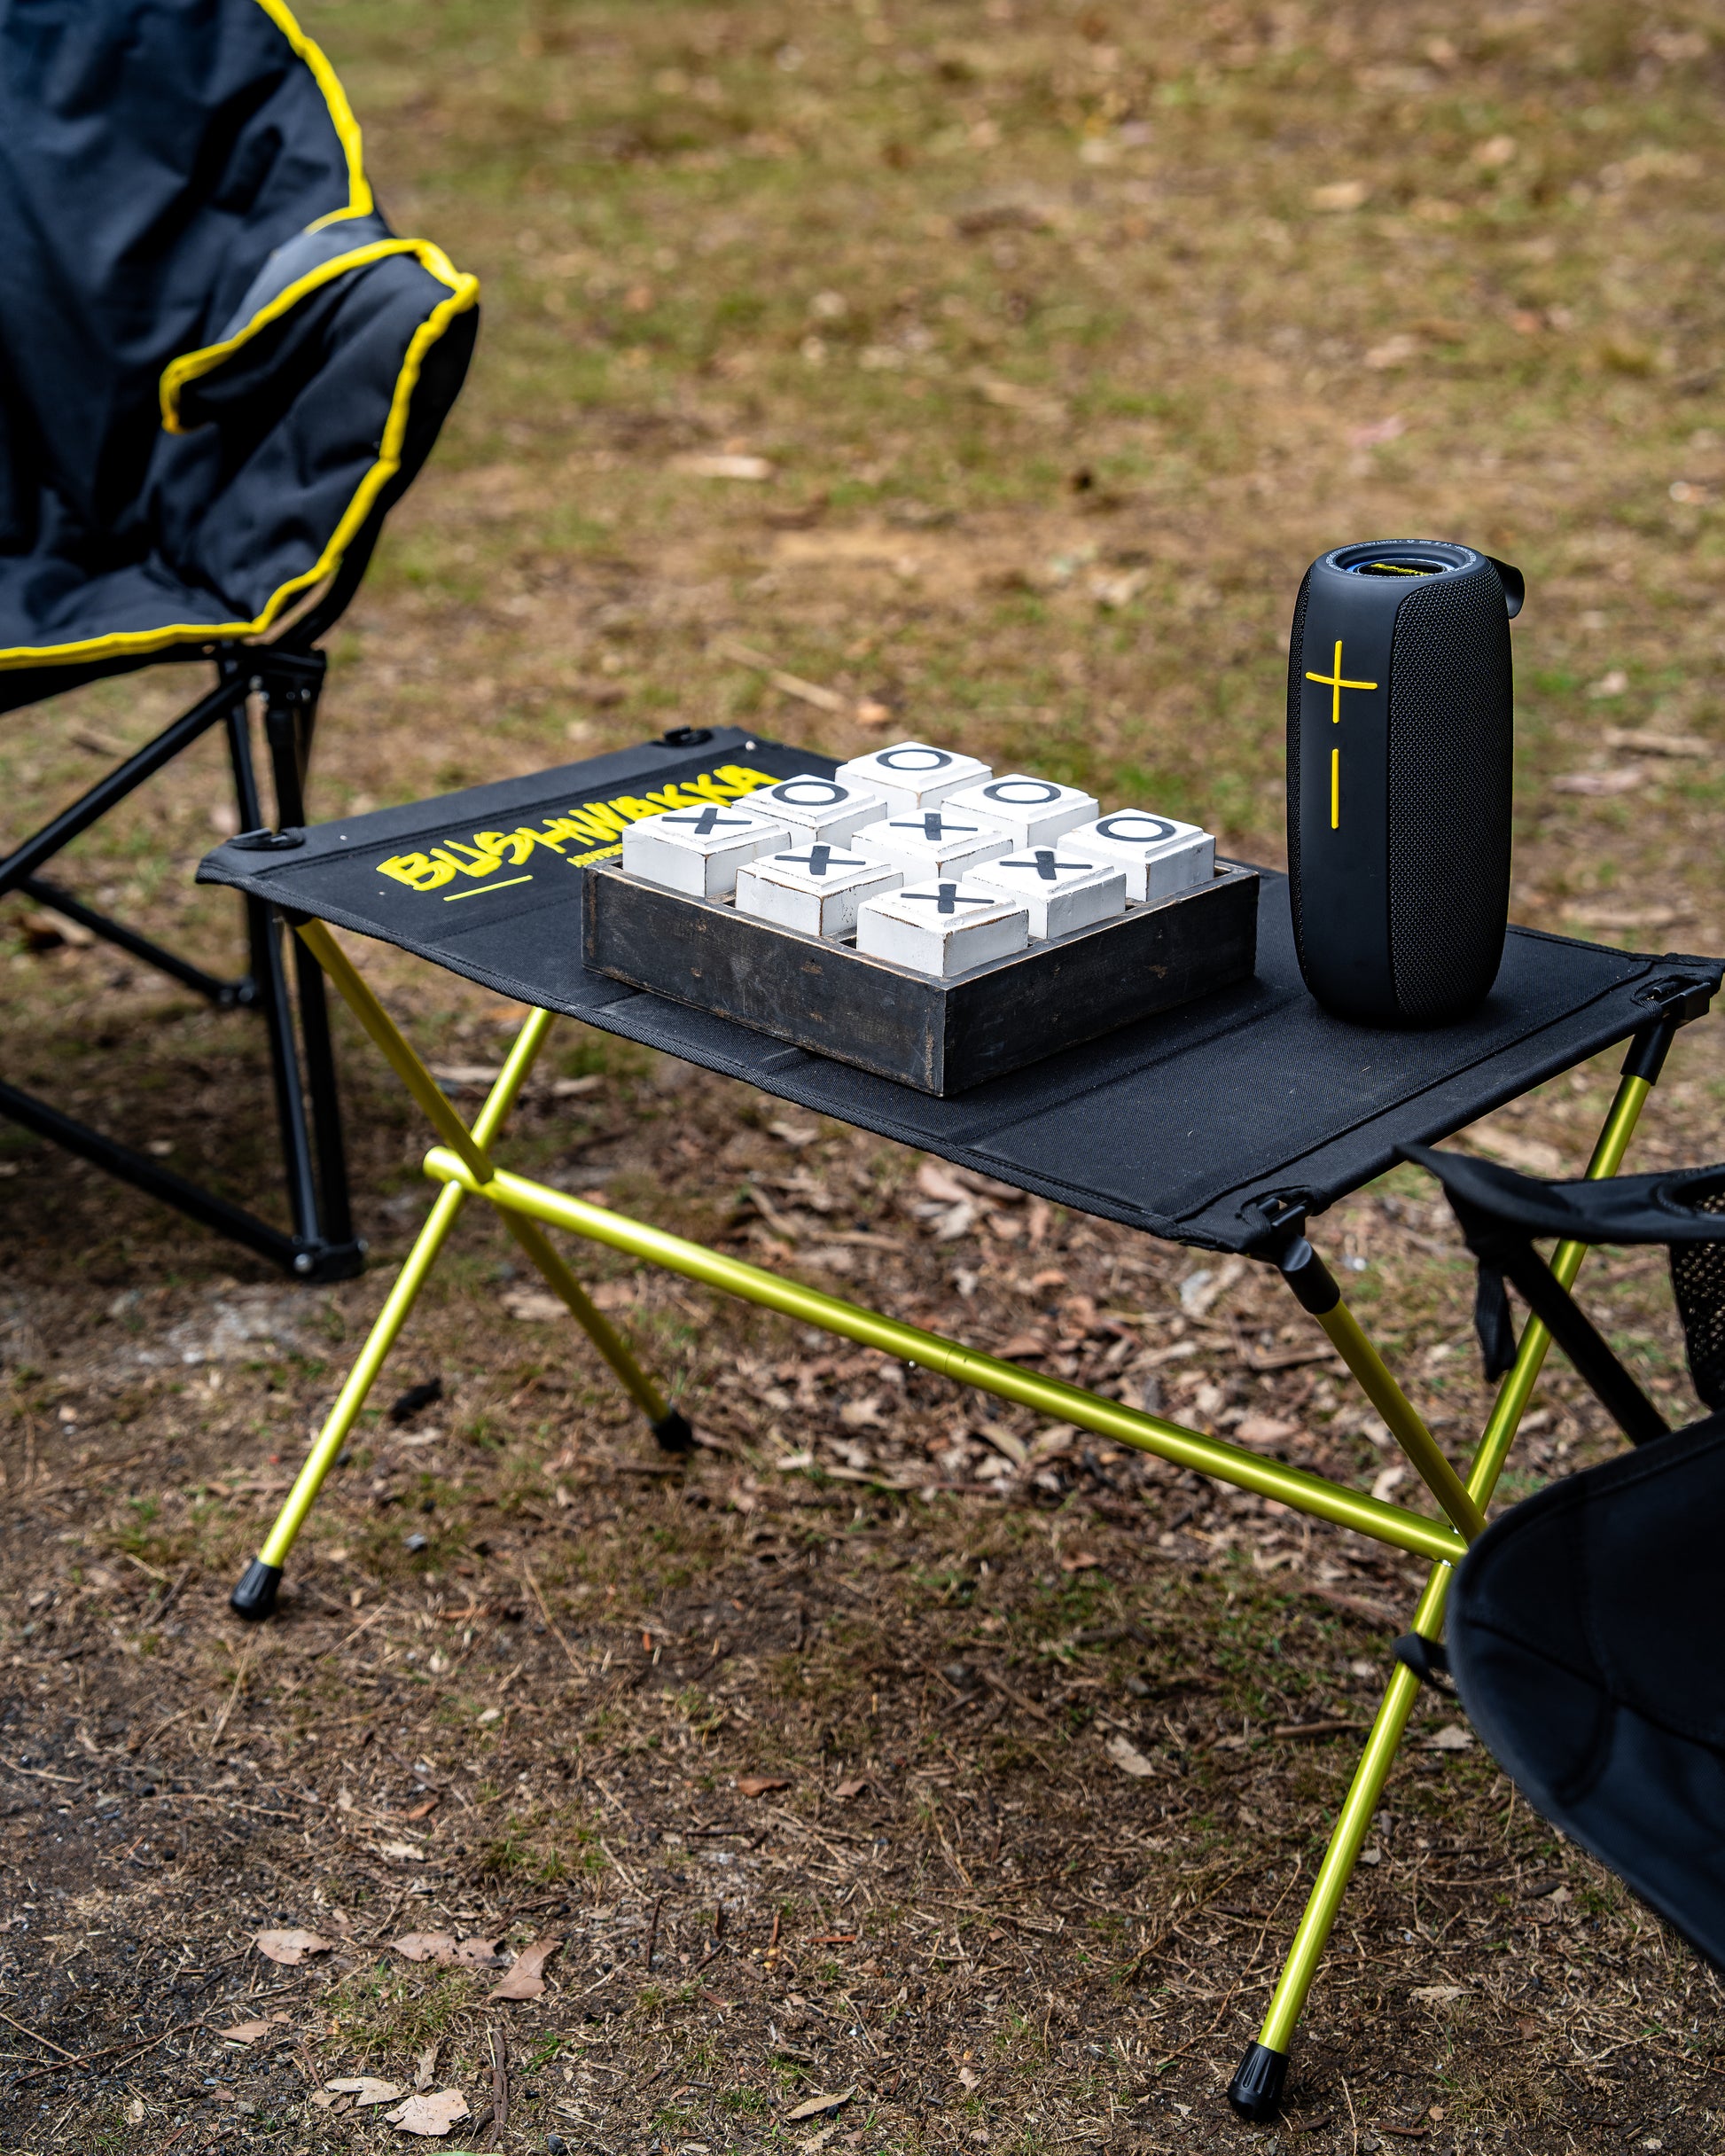 camping table holding a bluetooth speaker and game of naughts and crosses